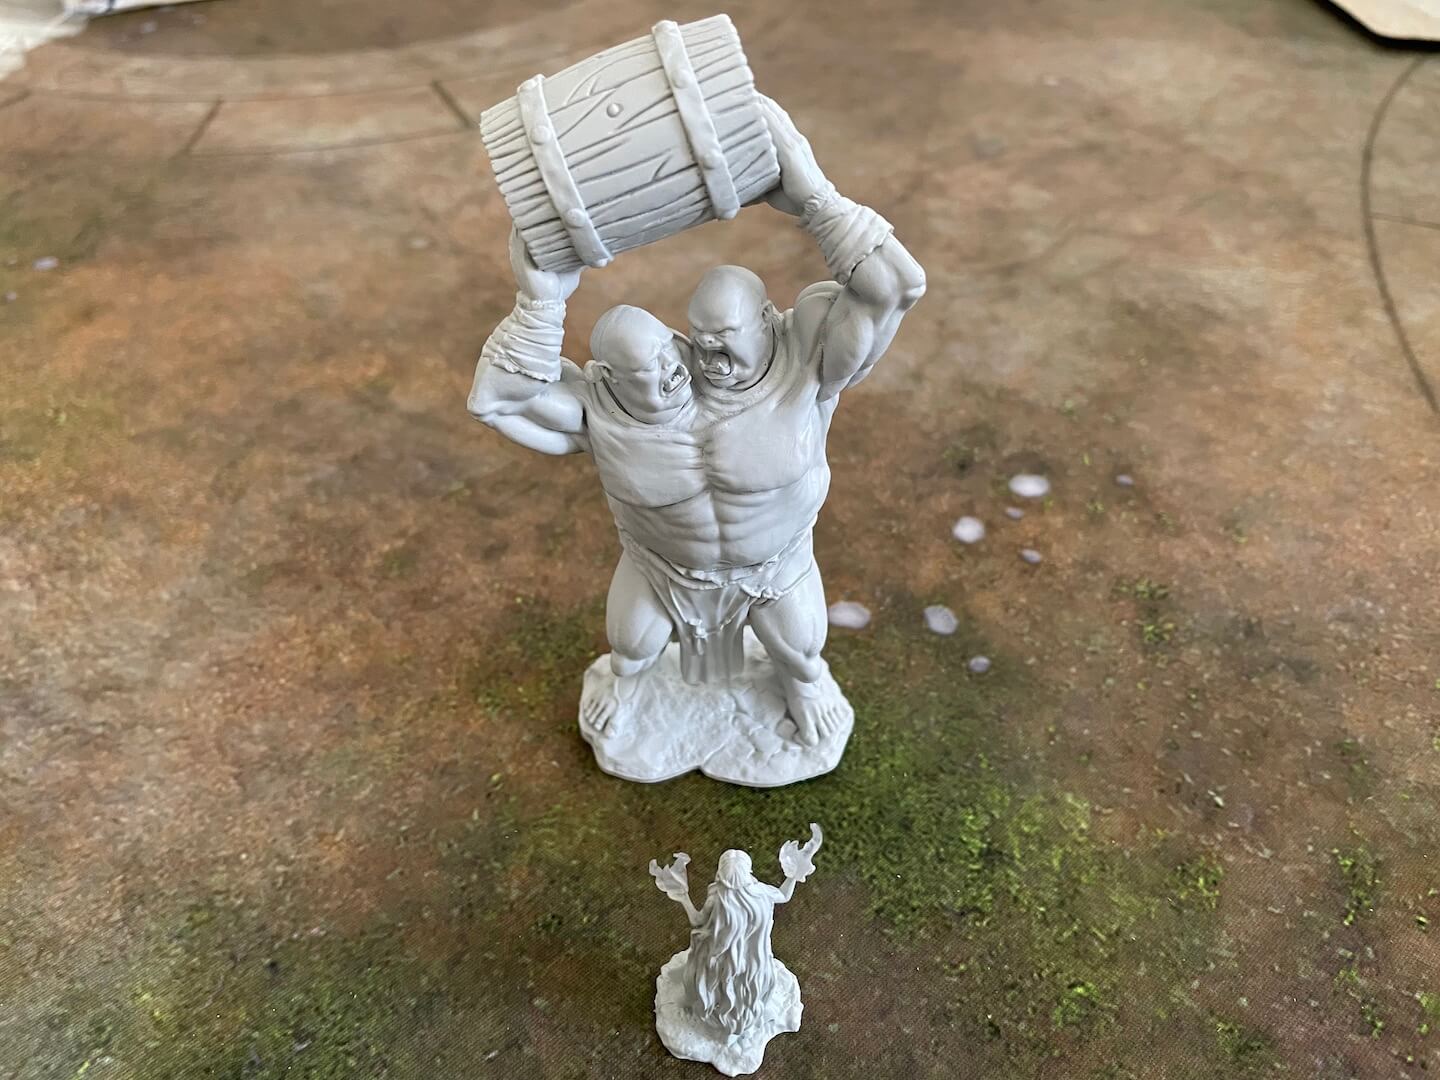 The two-headed Etten argues with itself as it attempts to smash its foe, as part of Wave 2 of Wizkids' Critical Role unpainted miniature line